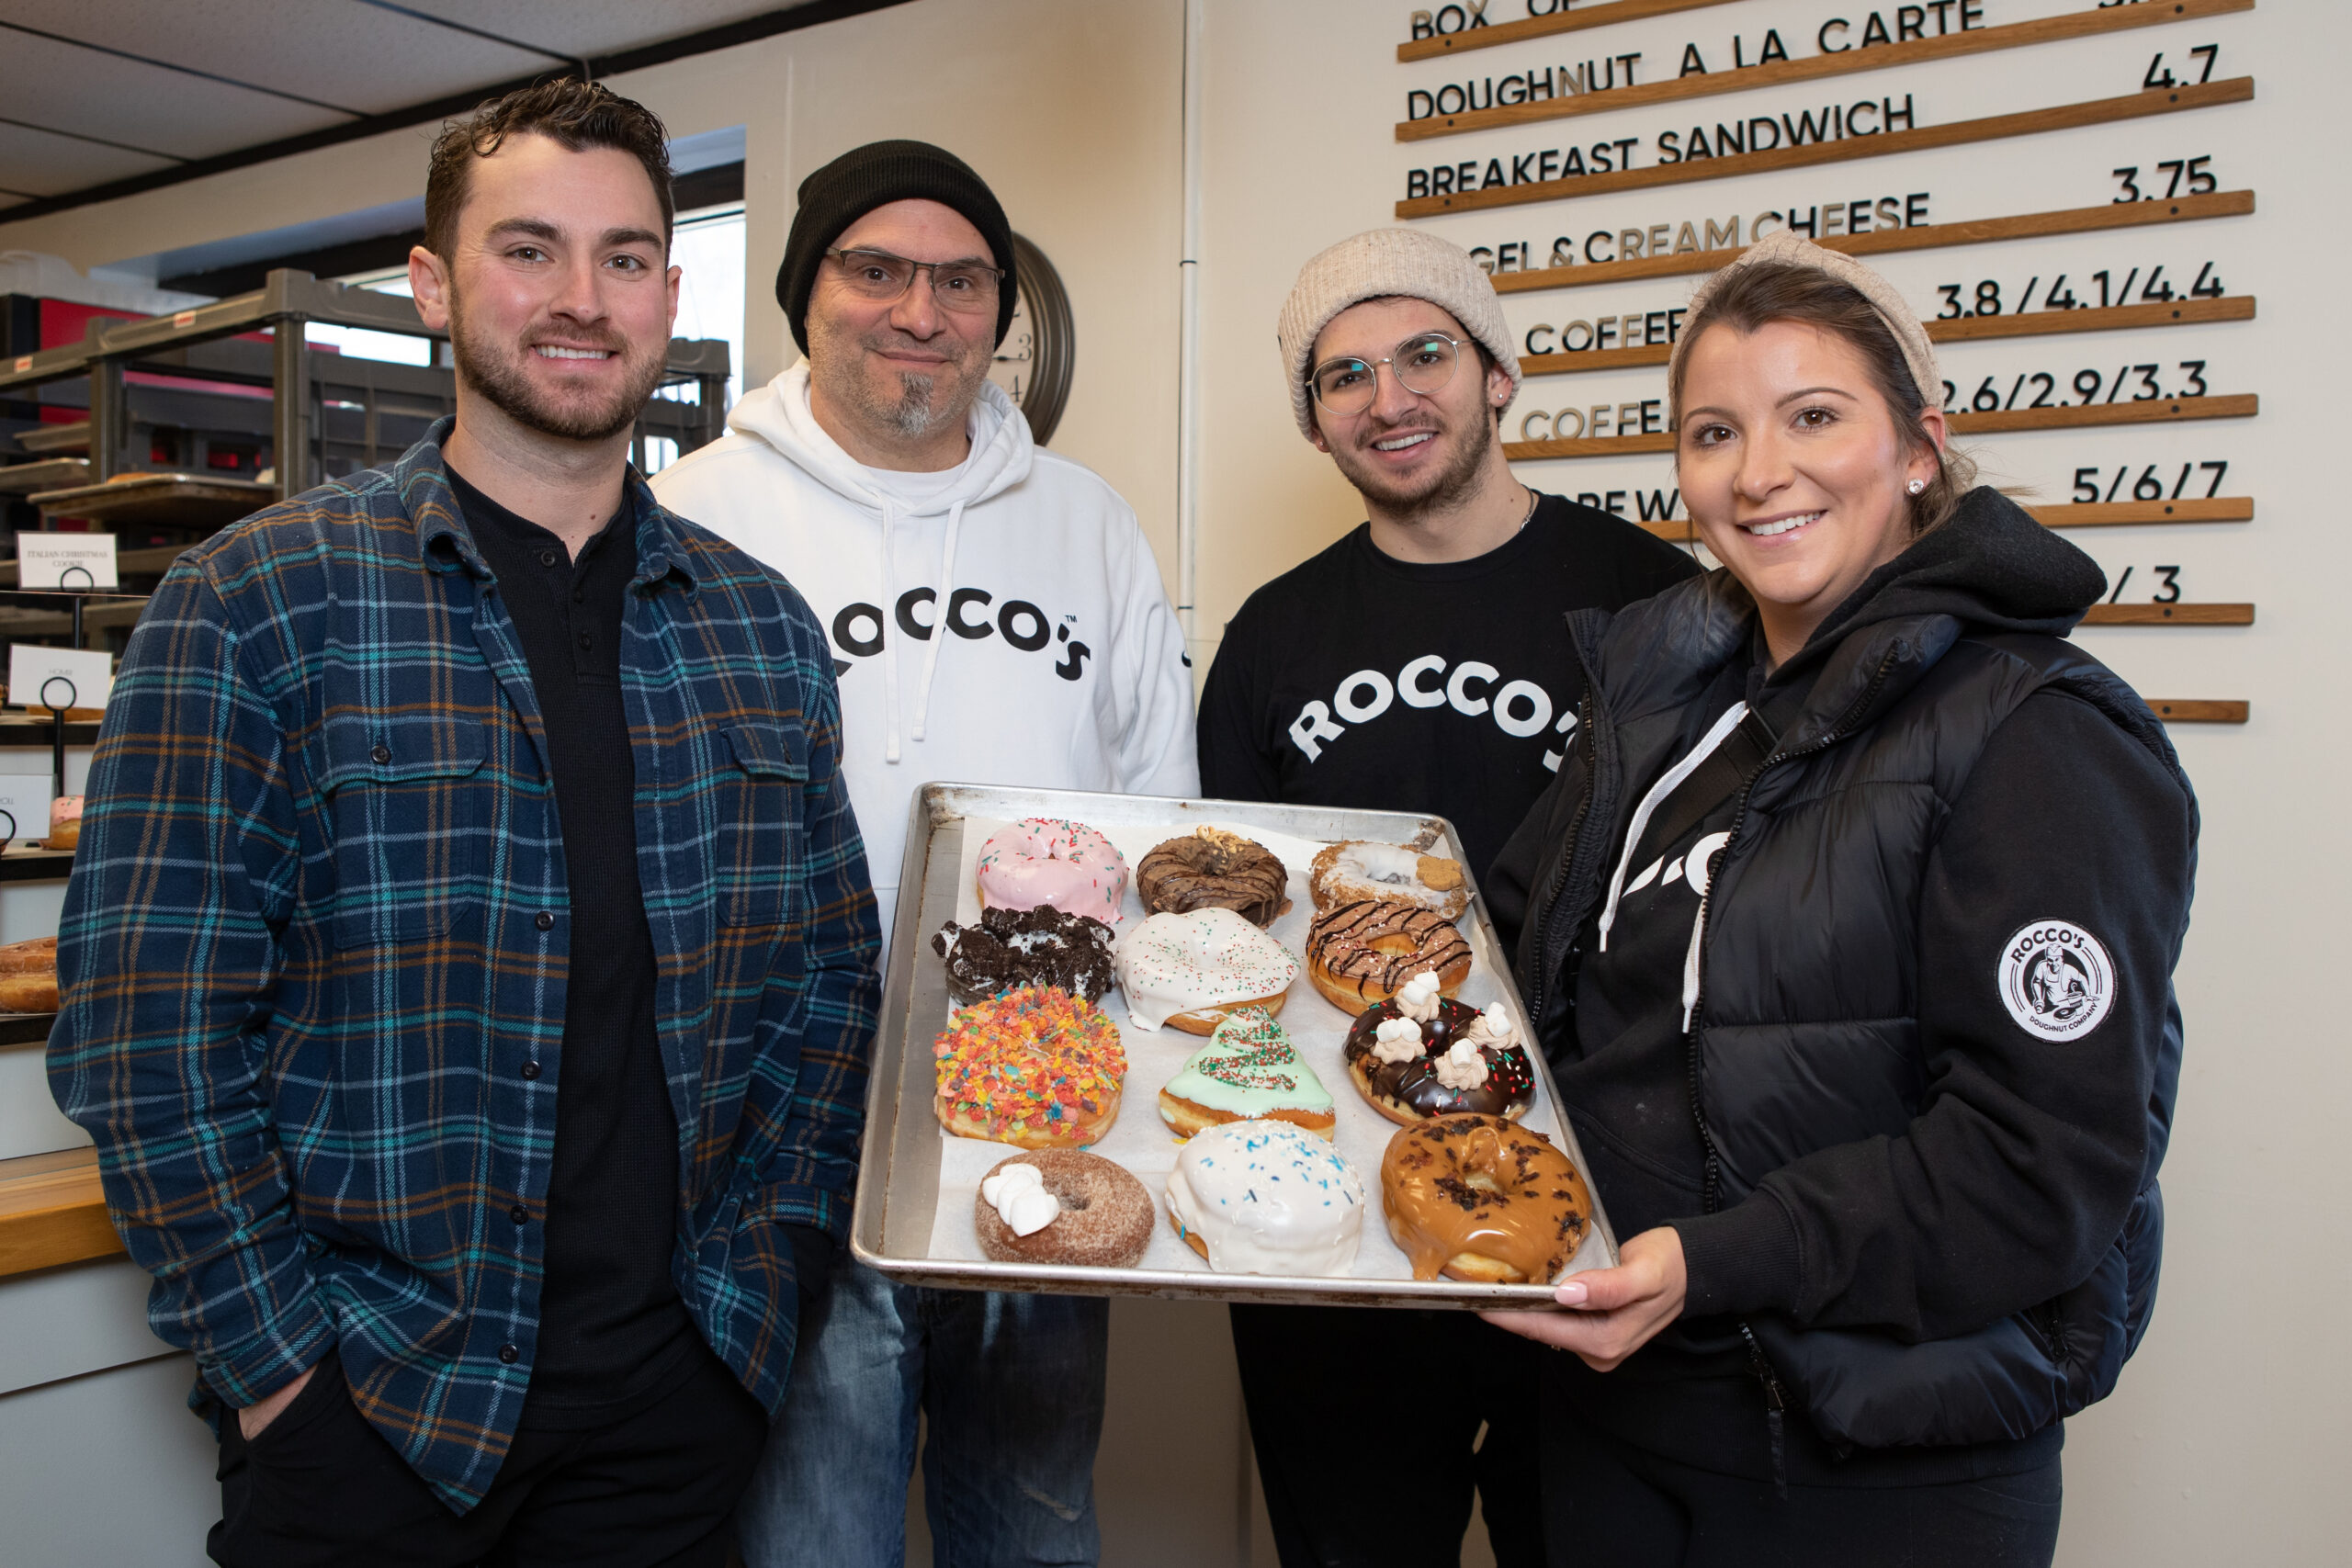 Alumni family finds sweet success one doughnut at a time